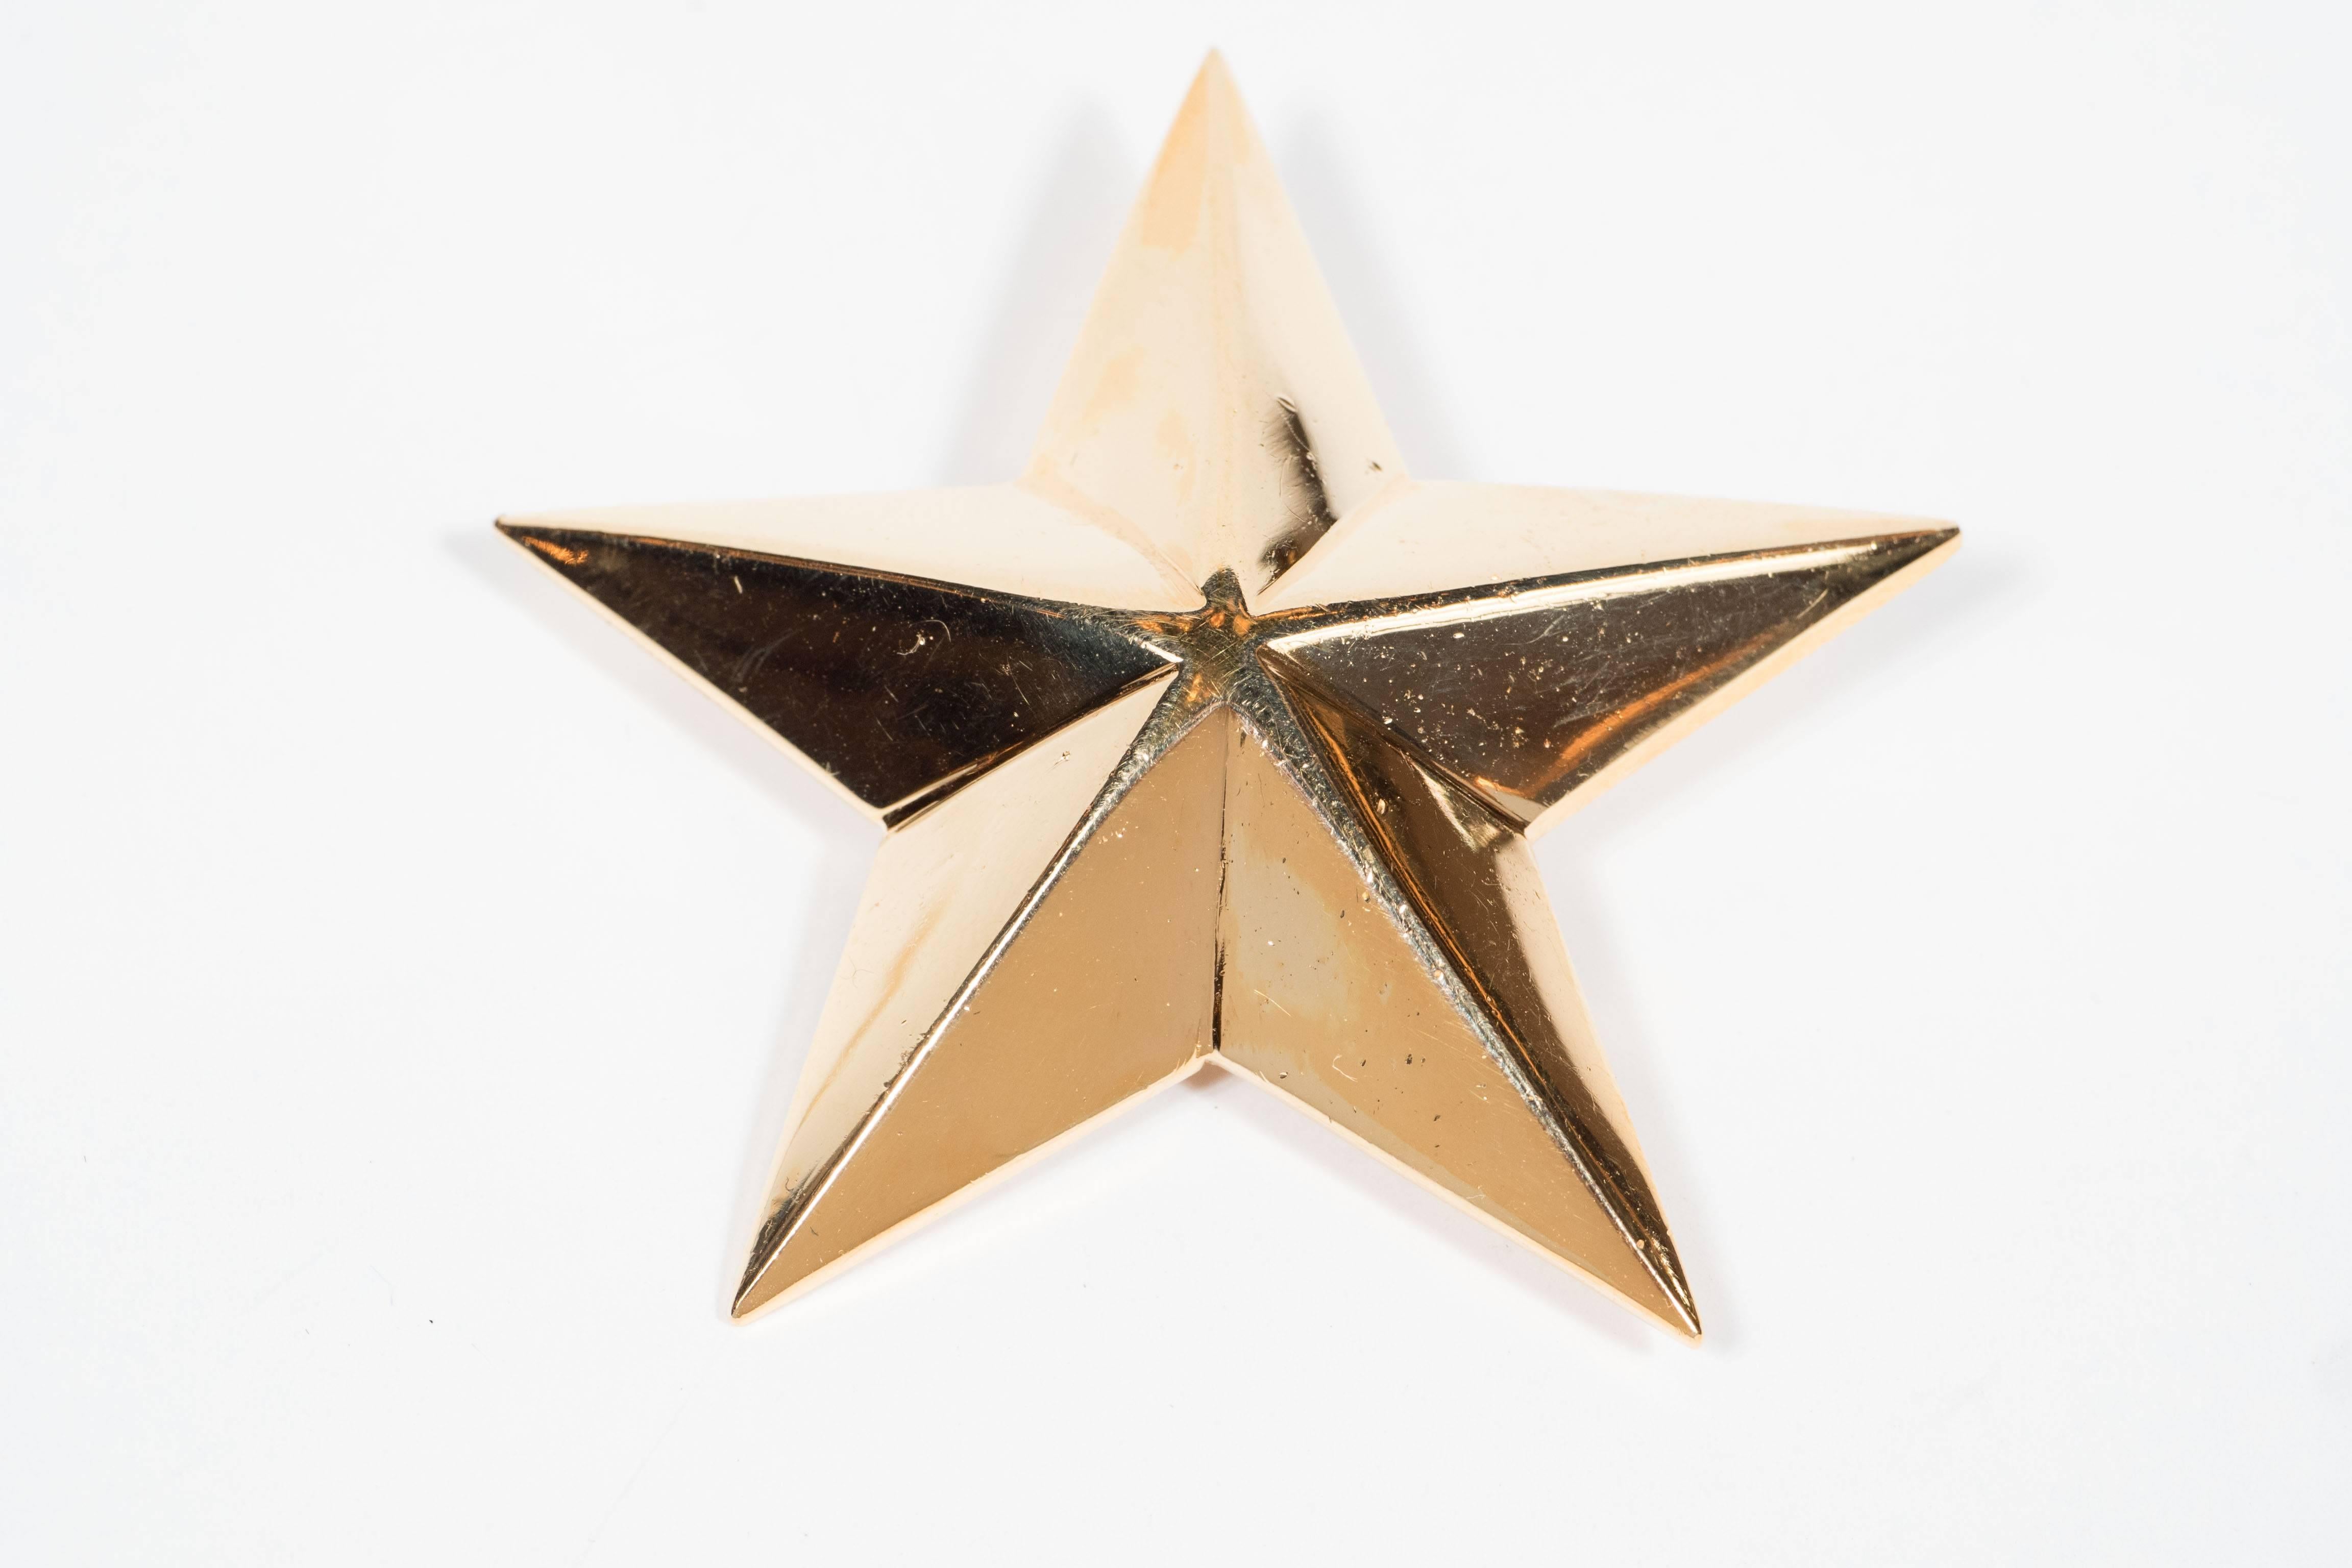 This stunning 18k yellow gold star brooch was realized by illustrious Viennese-American jewelry firm Demner, circa 1970. Demner is a third-generation Viennese jewelry atelier founded in 1947. The family owned company has remained prominent Madison